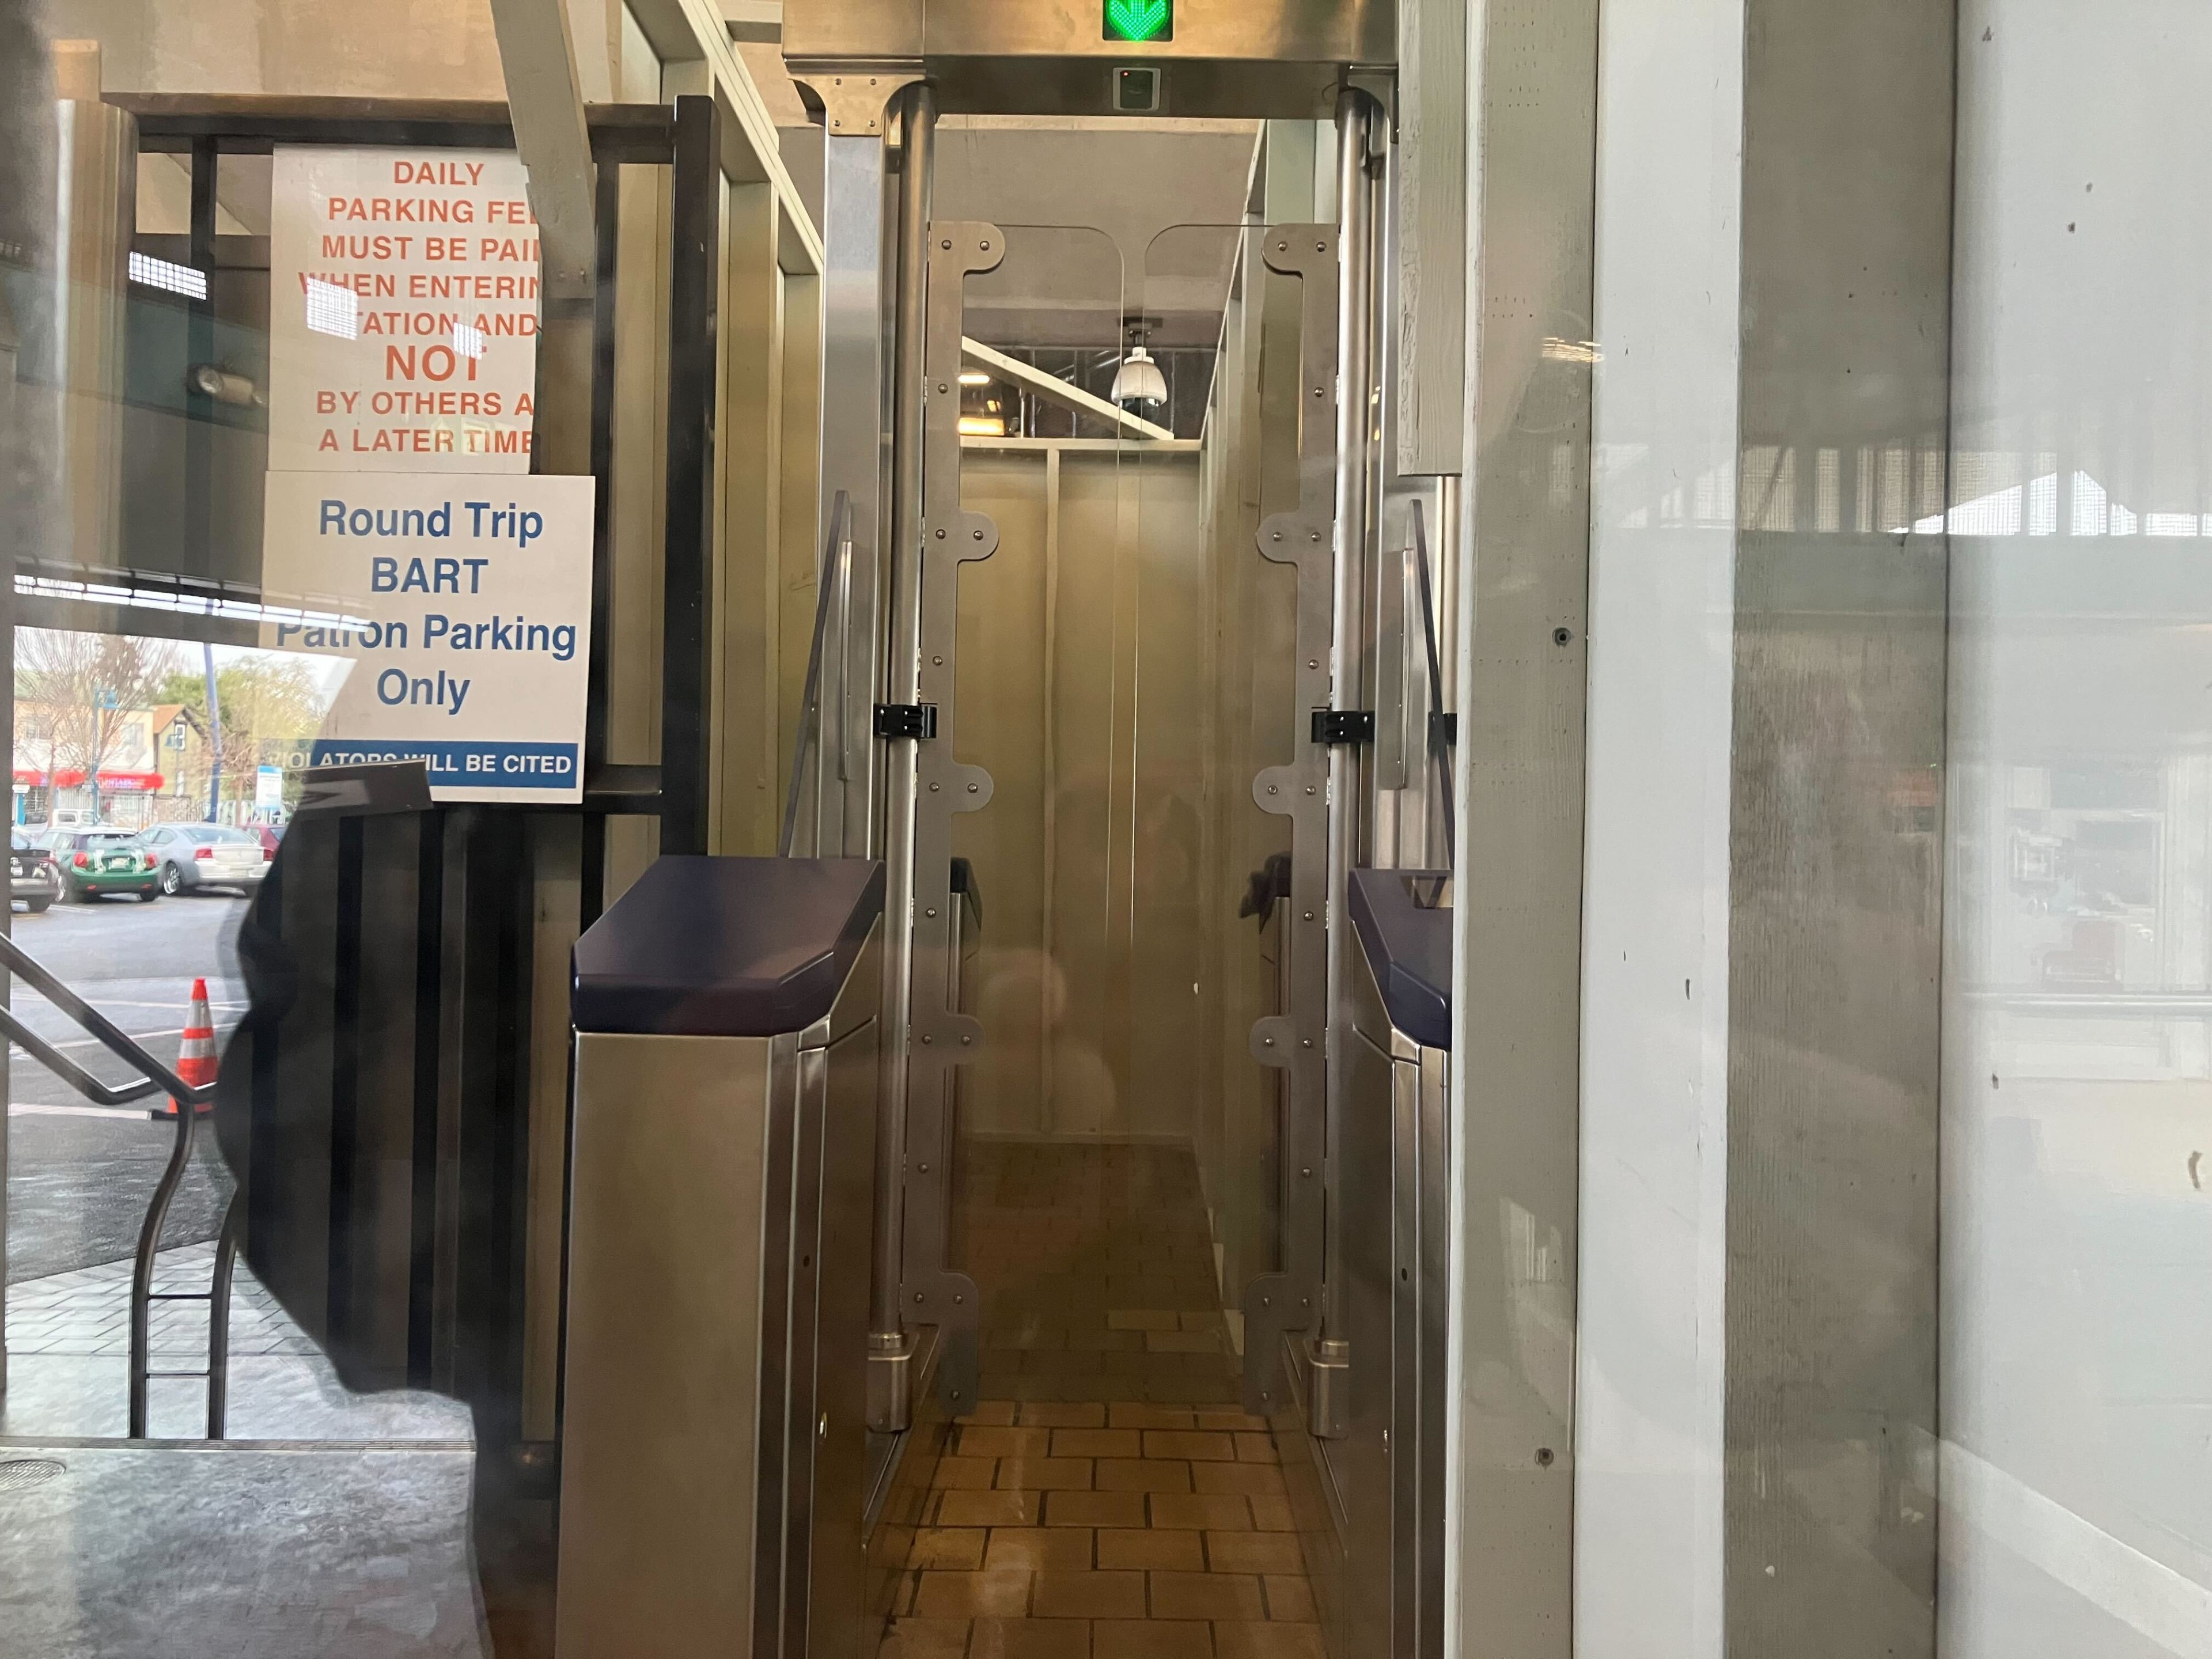 The sixth gate with a new mechanical door locking system, seen here inside a secure area, is set to be added at West Oakland Station in the coming weeks, according to BART officials.